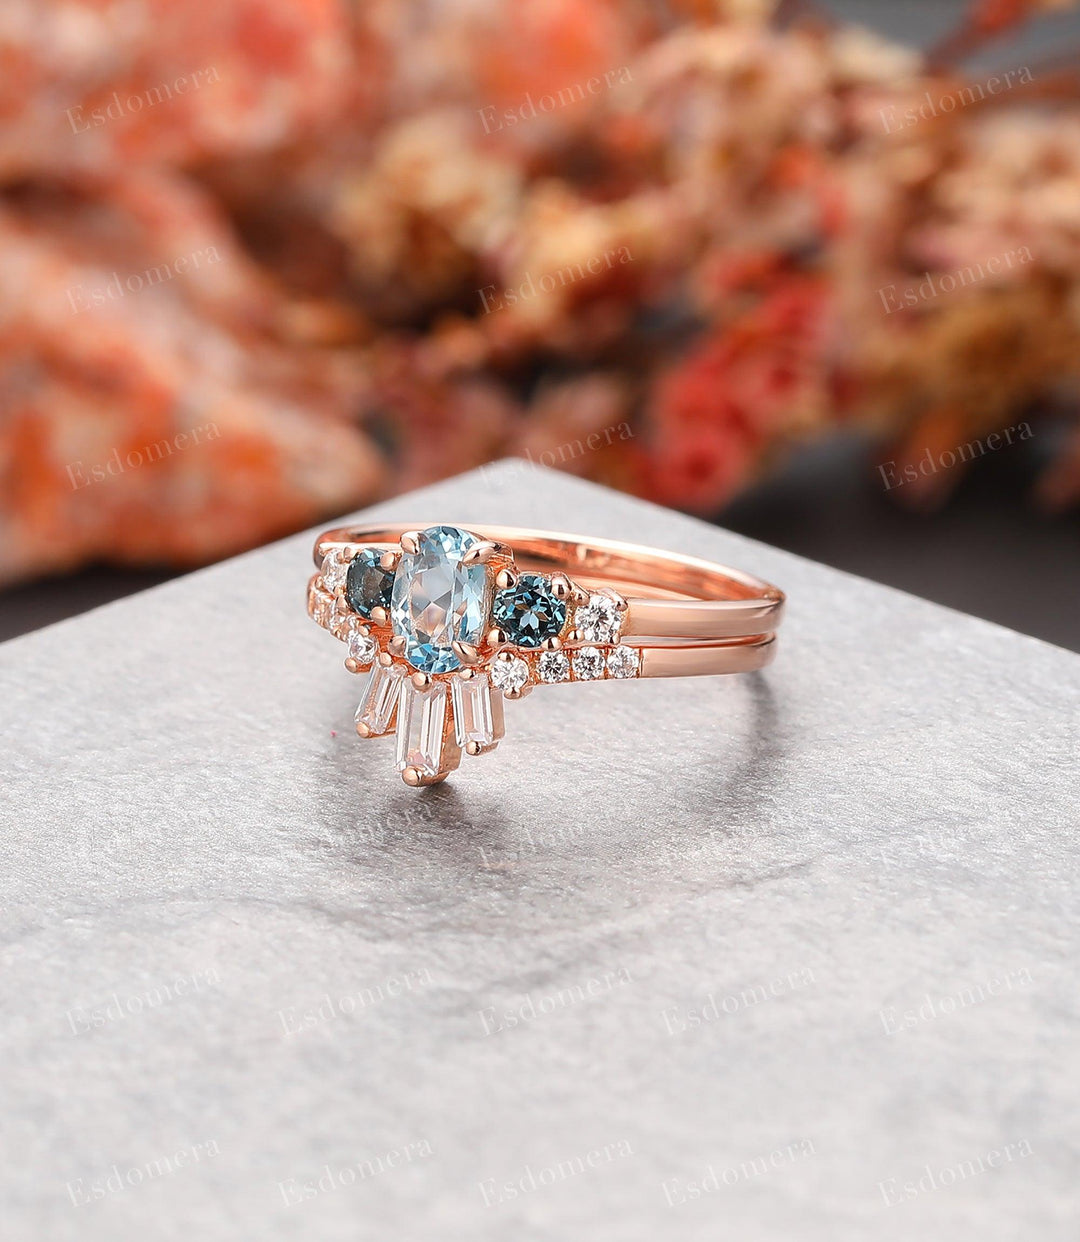 Sky Blue Topaz Wedding Ring Set, Oval Topaz Engagement Ring For Her, Birthday Gifts - Esdomera